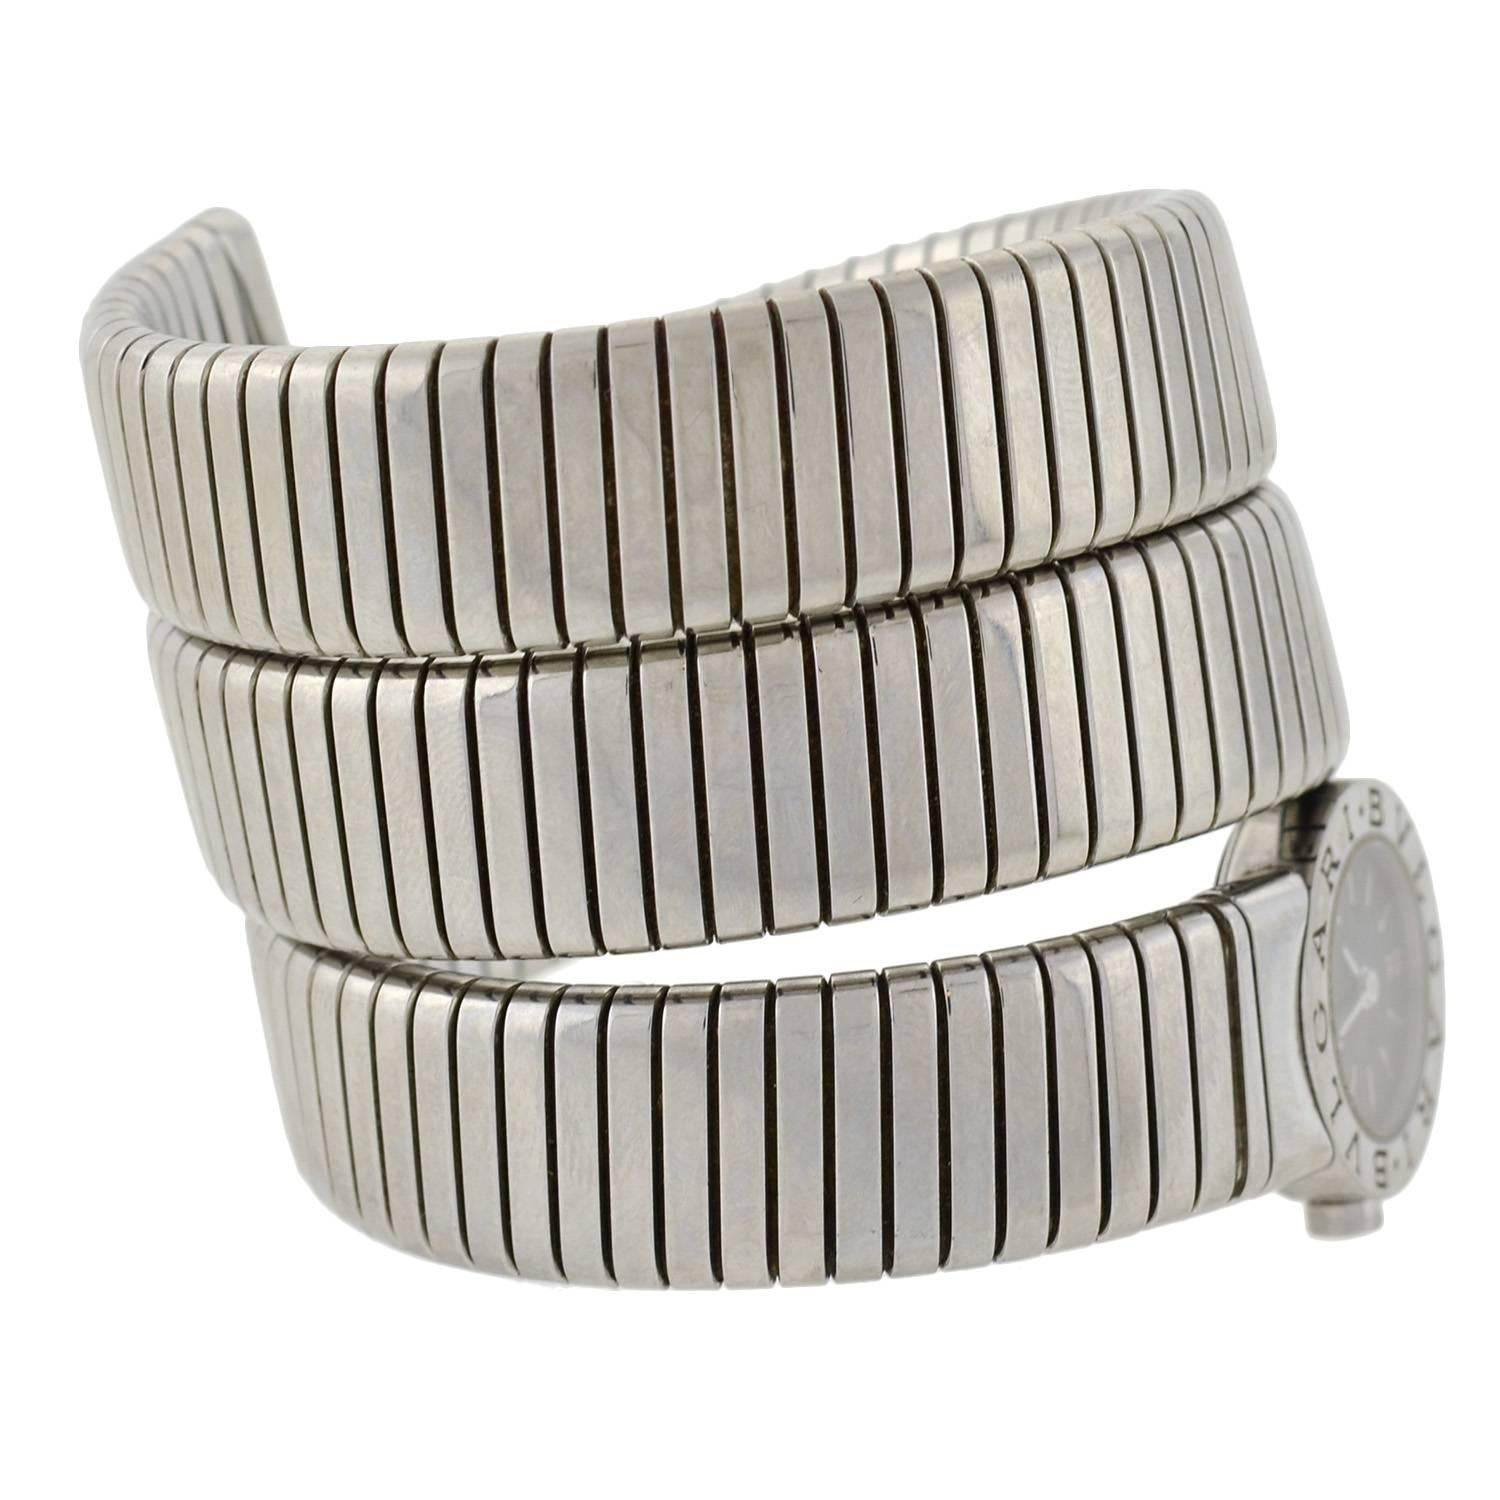 This fabulous watch bracelet is a signed estate piece by Bvlgari! Known as the "Serpenti Tubogas" watch, this stainless steel model has a stylish wrap-around design. The flexible watch band has a ridged surface and snake-like appearance